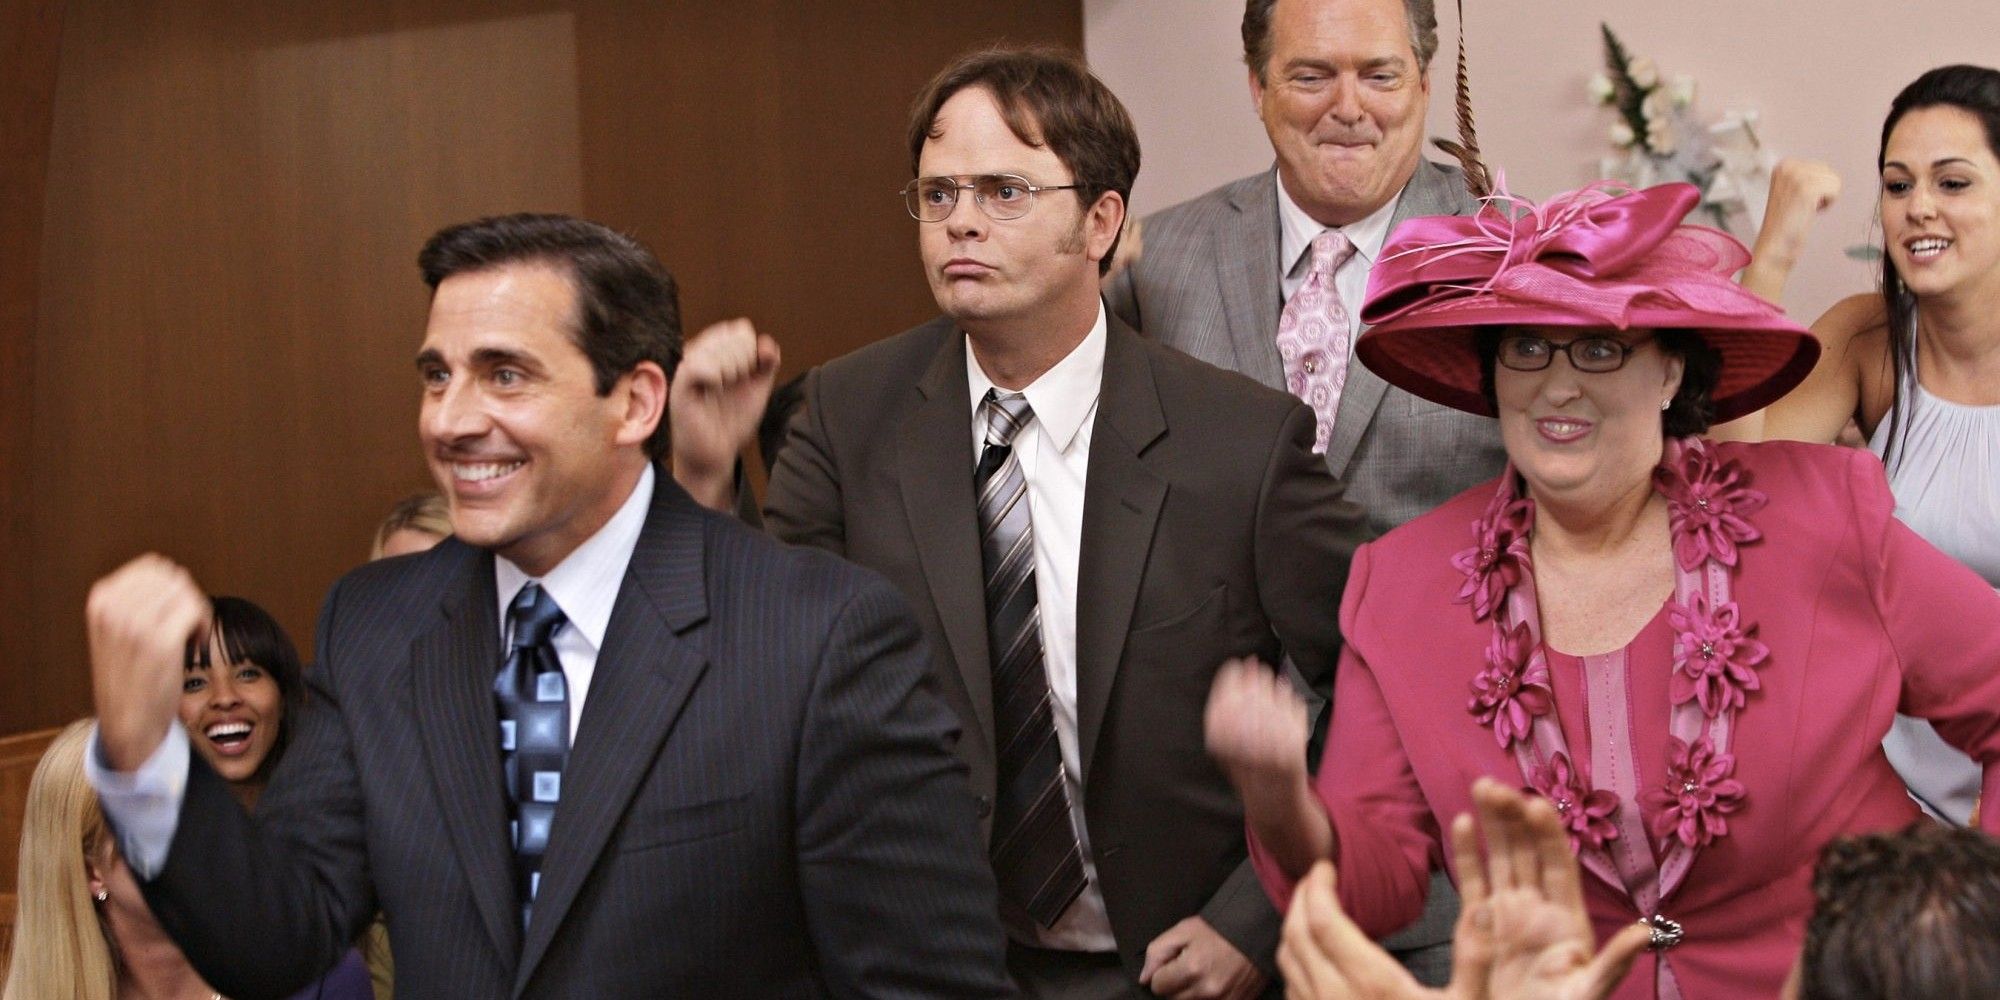 Steve Carell, Rainn Wilson and Phyllis Smith dancing in The Office Jim and Pam's Wedding Entrance 